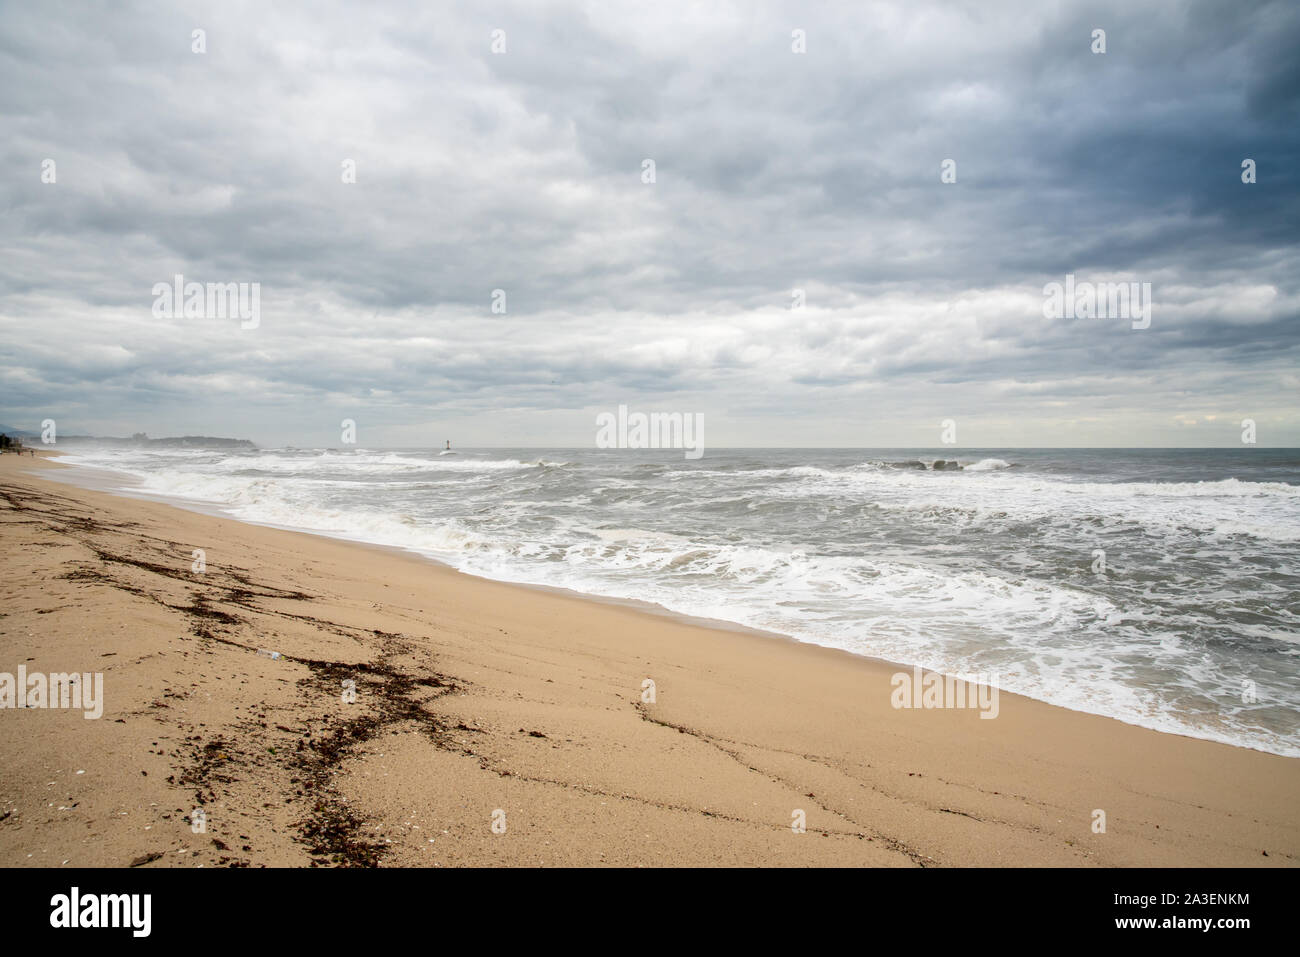 A seashore scene in which high waves come with cloudy weather and strong winds. South Korea Donghae the sea. Stock Photo